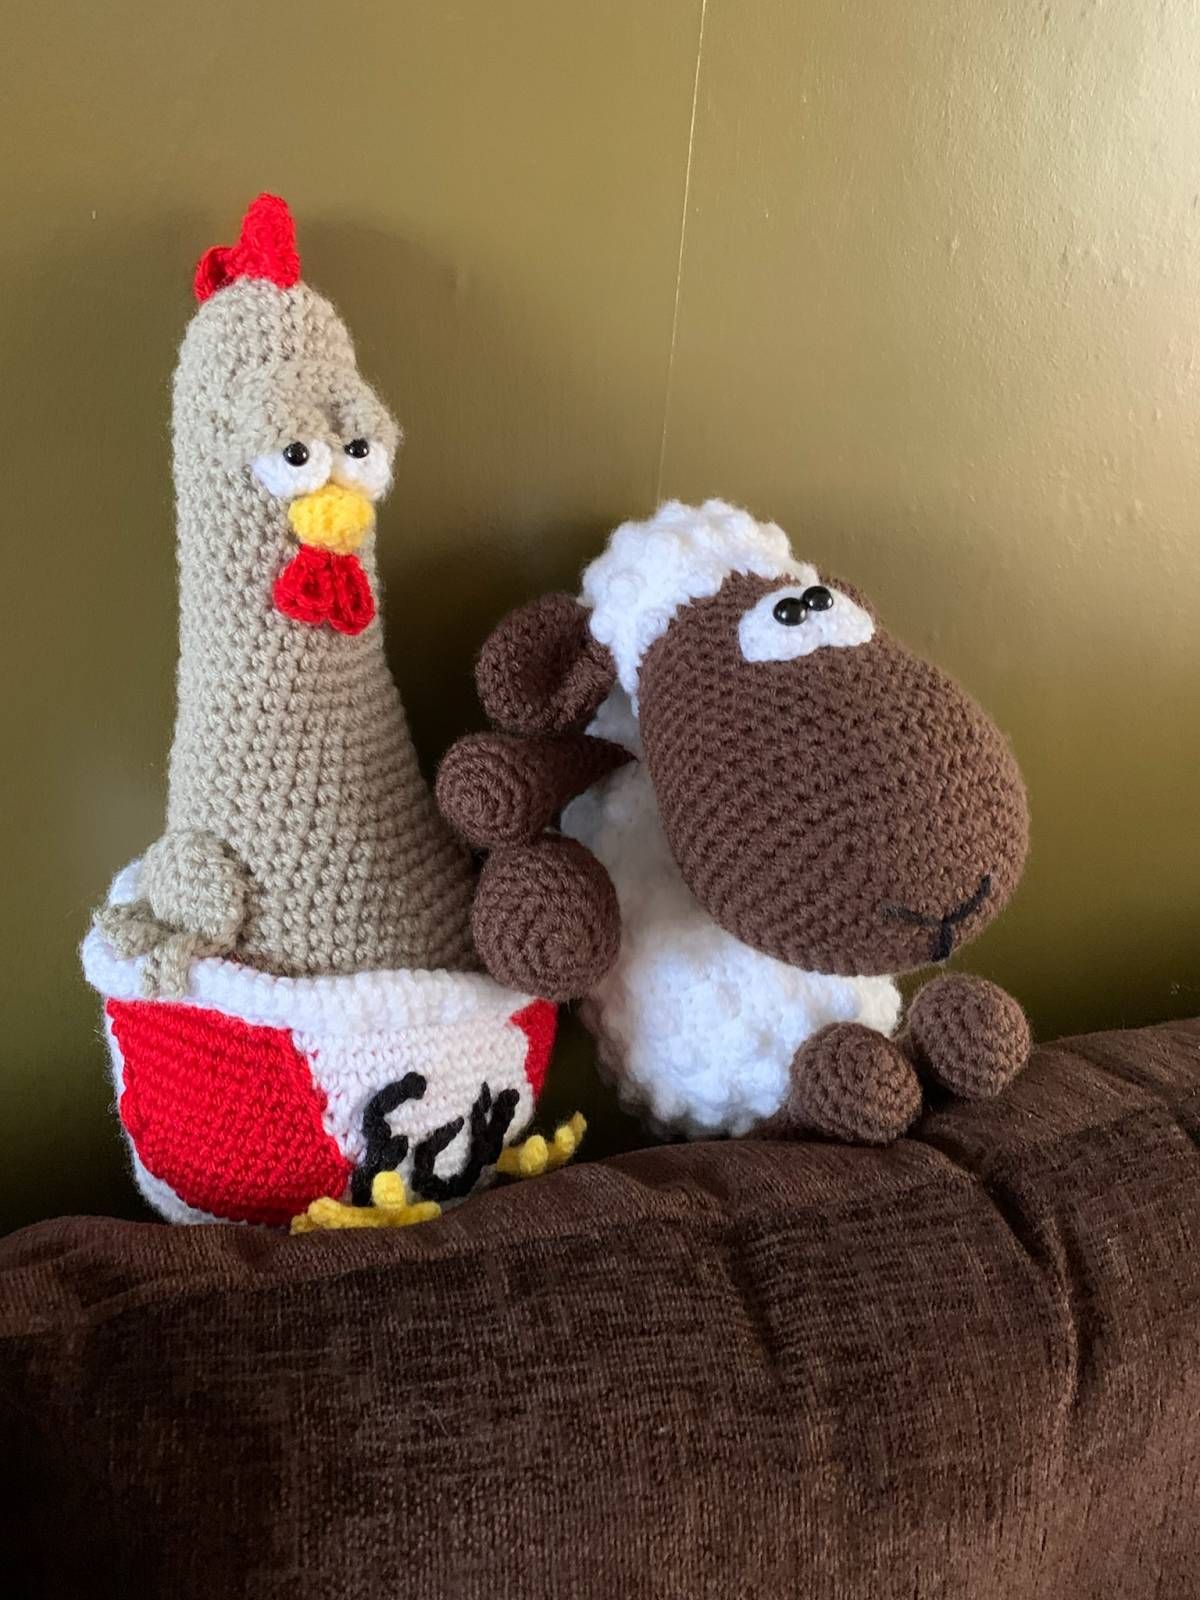 Amigurumi Crochet KFC Sheep Pattern Review by Vicki Hope for Cottontail Whiskers